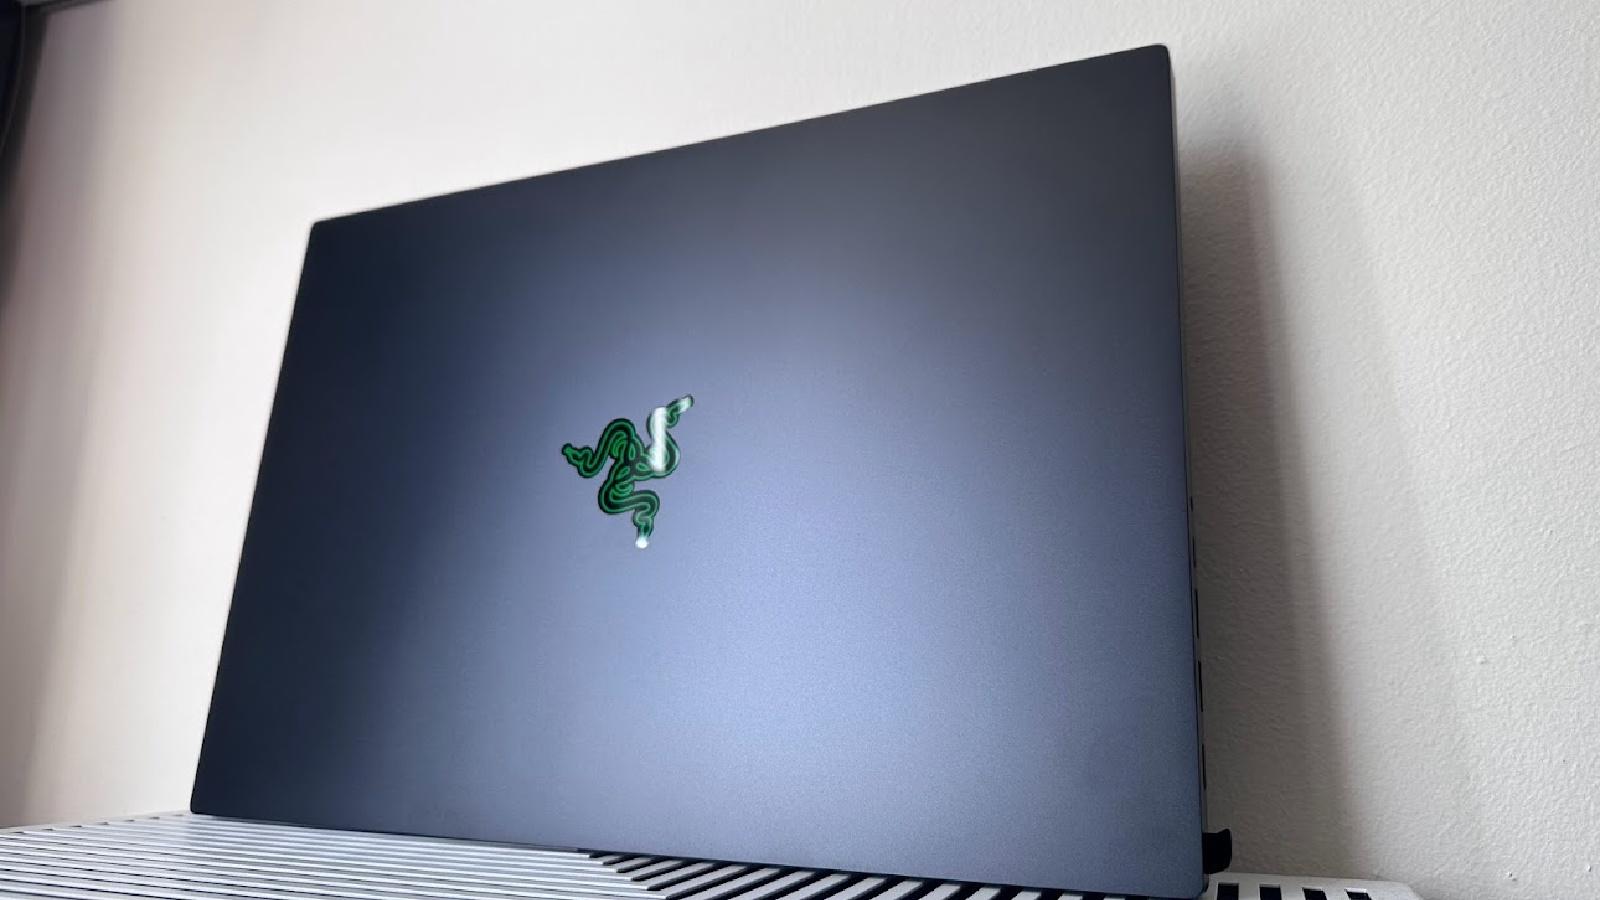 The top of the Razer Blade 16's chassis